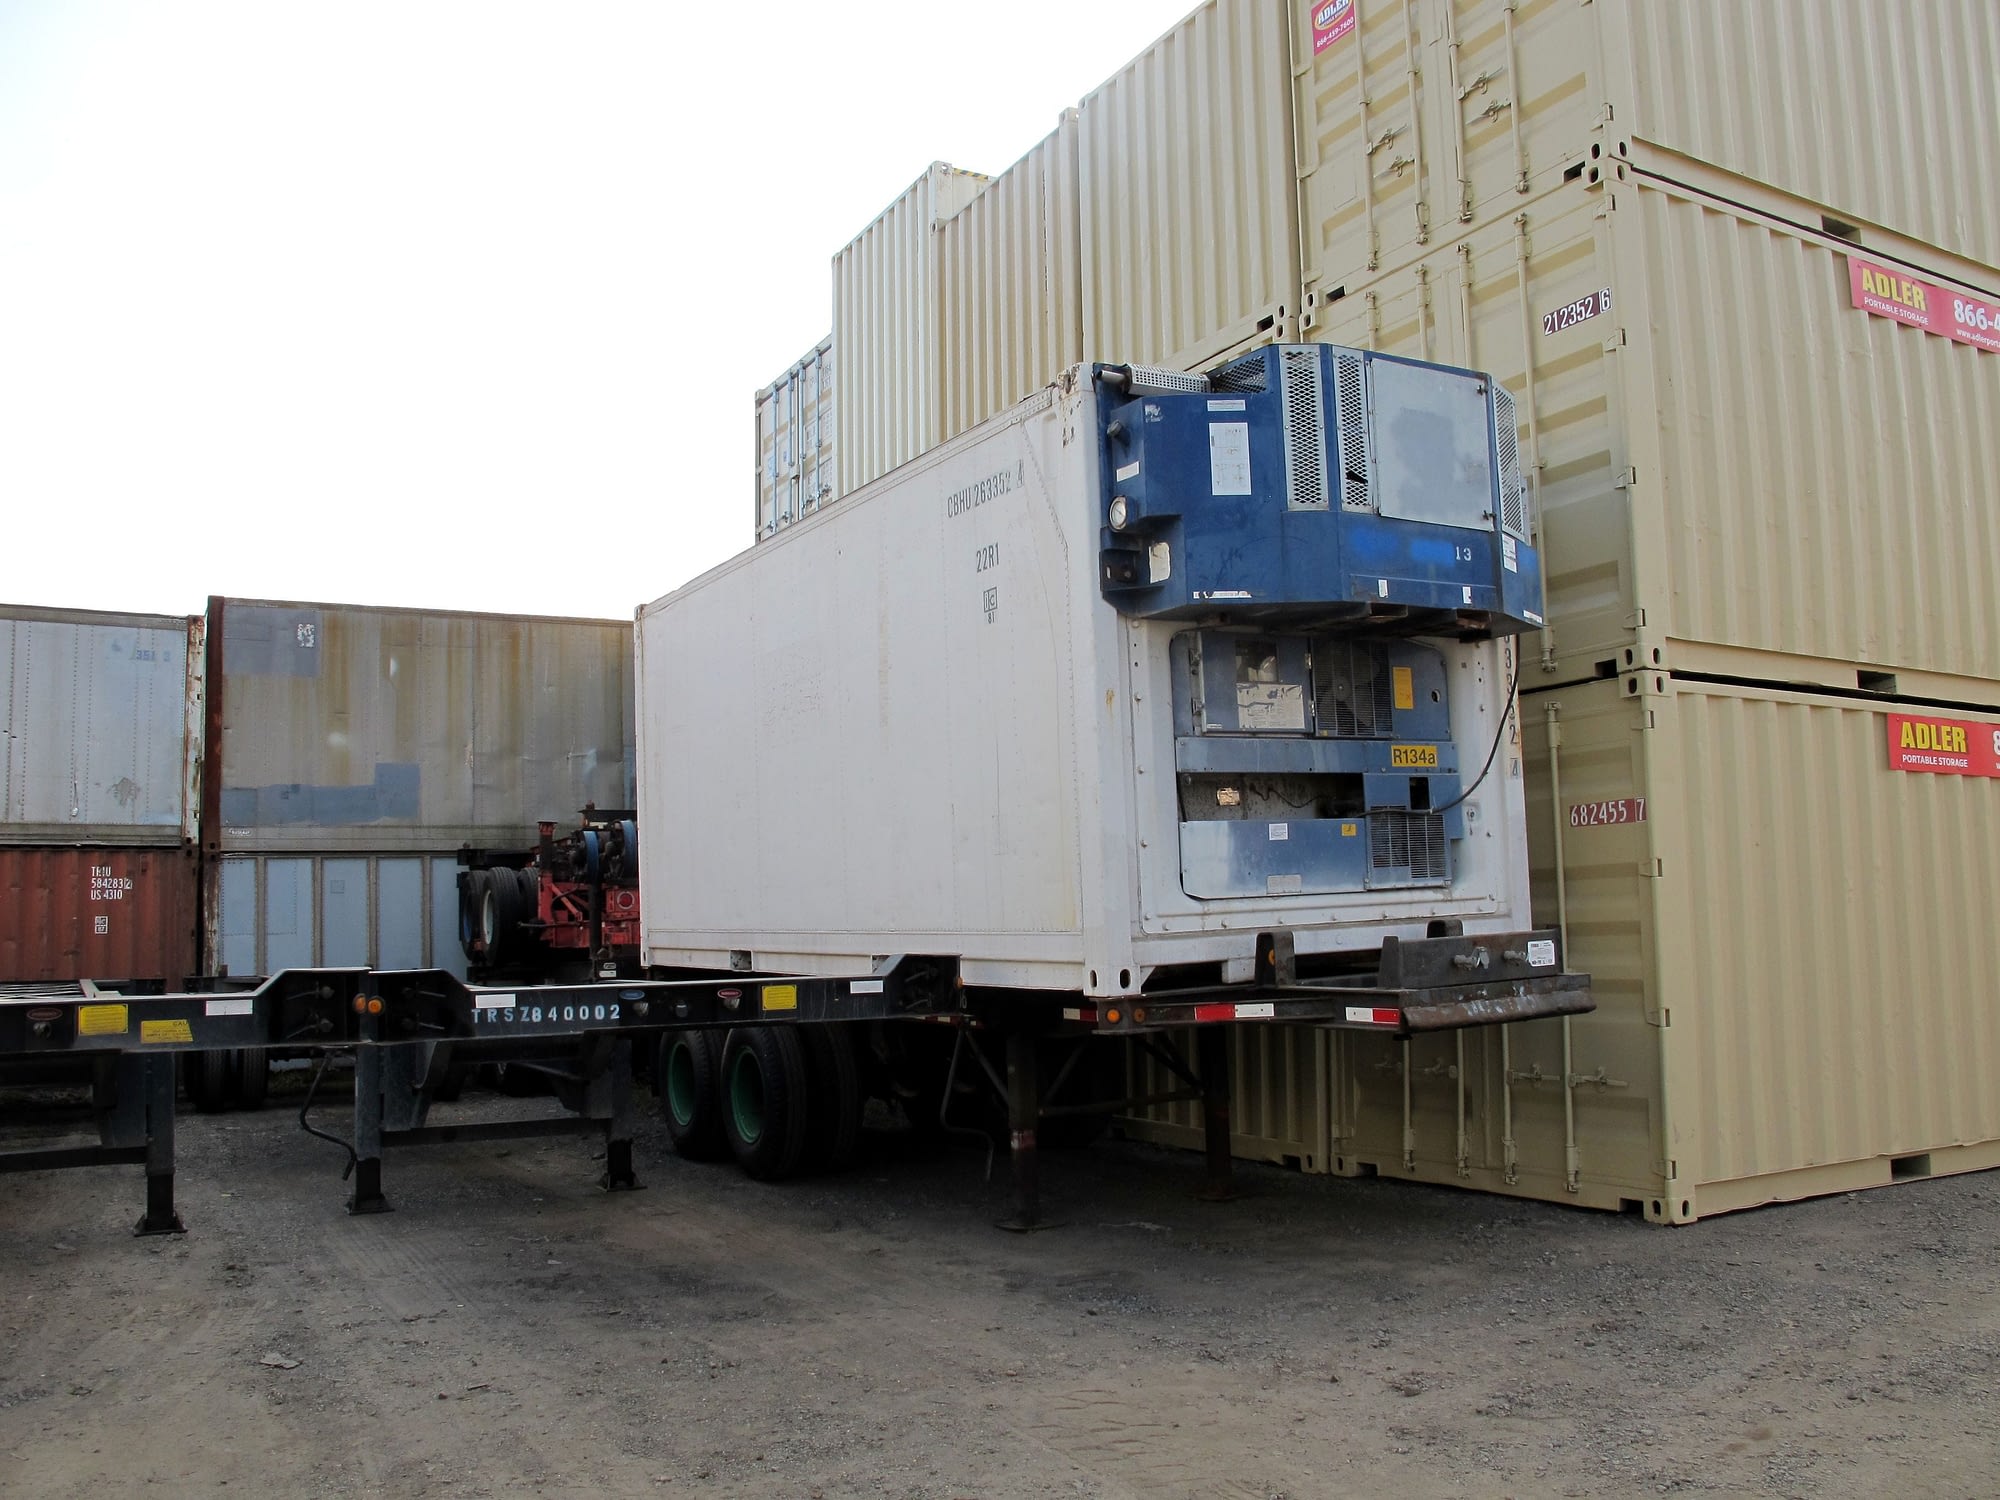 TRS Containers sells and rents used diesel generator sets to power reefer containers while mounted on a chassis